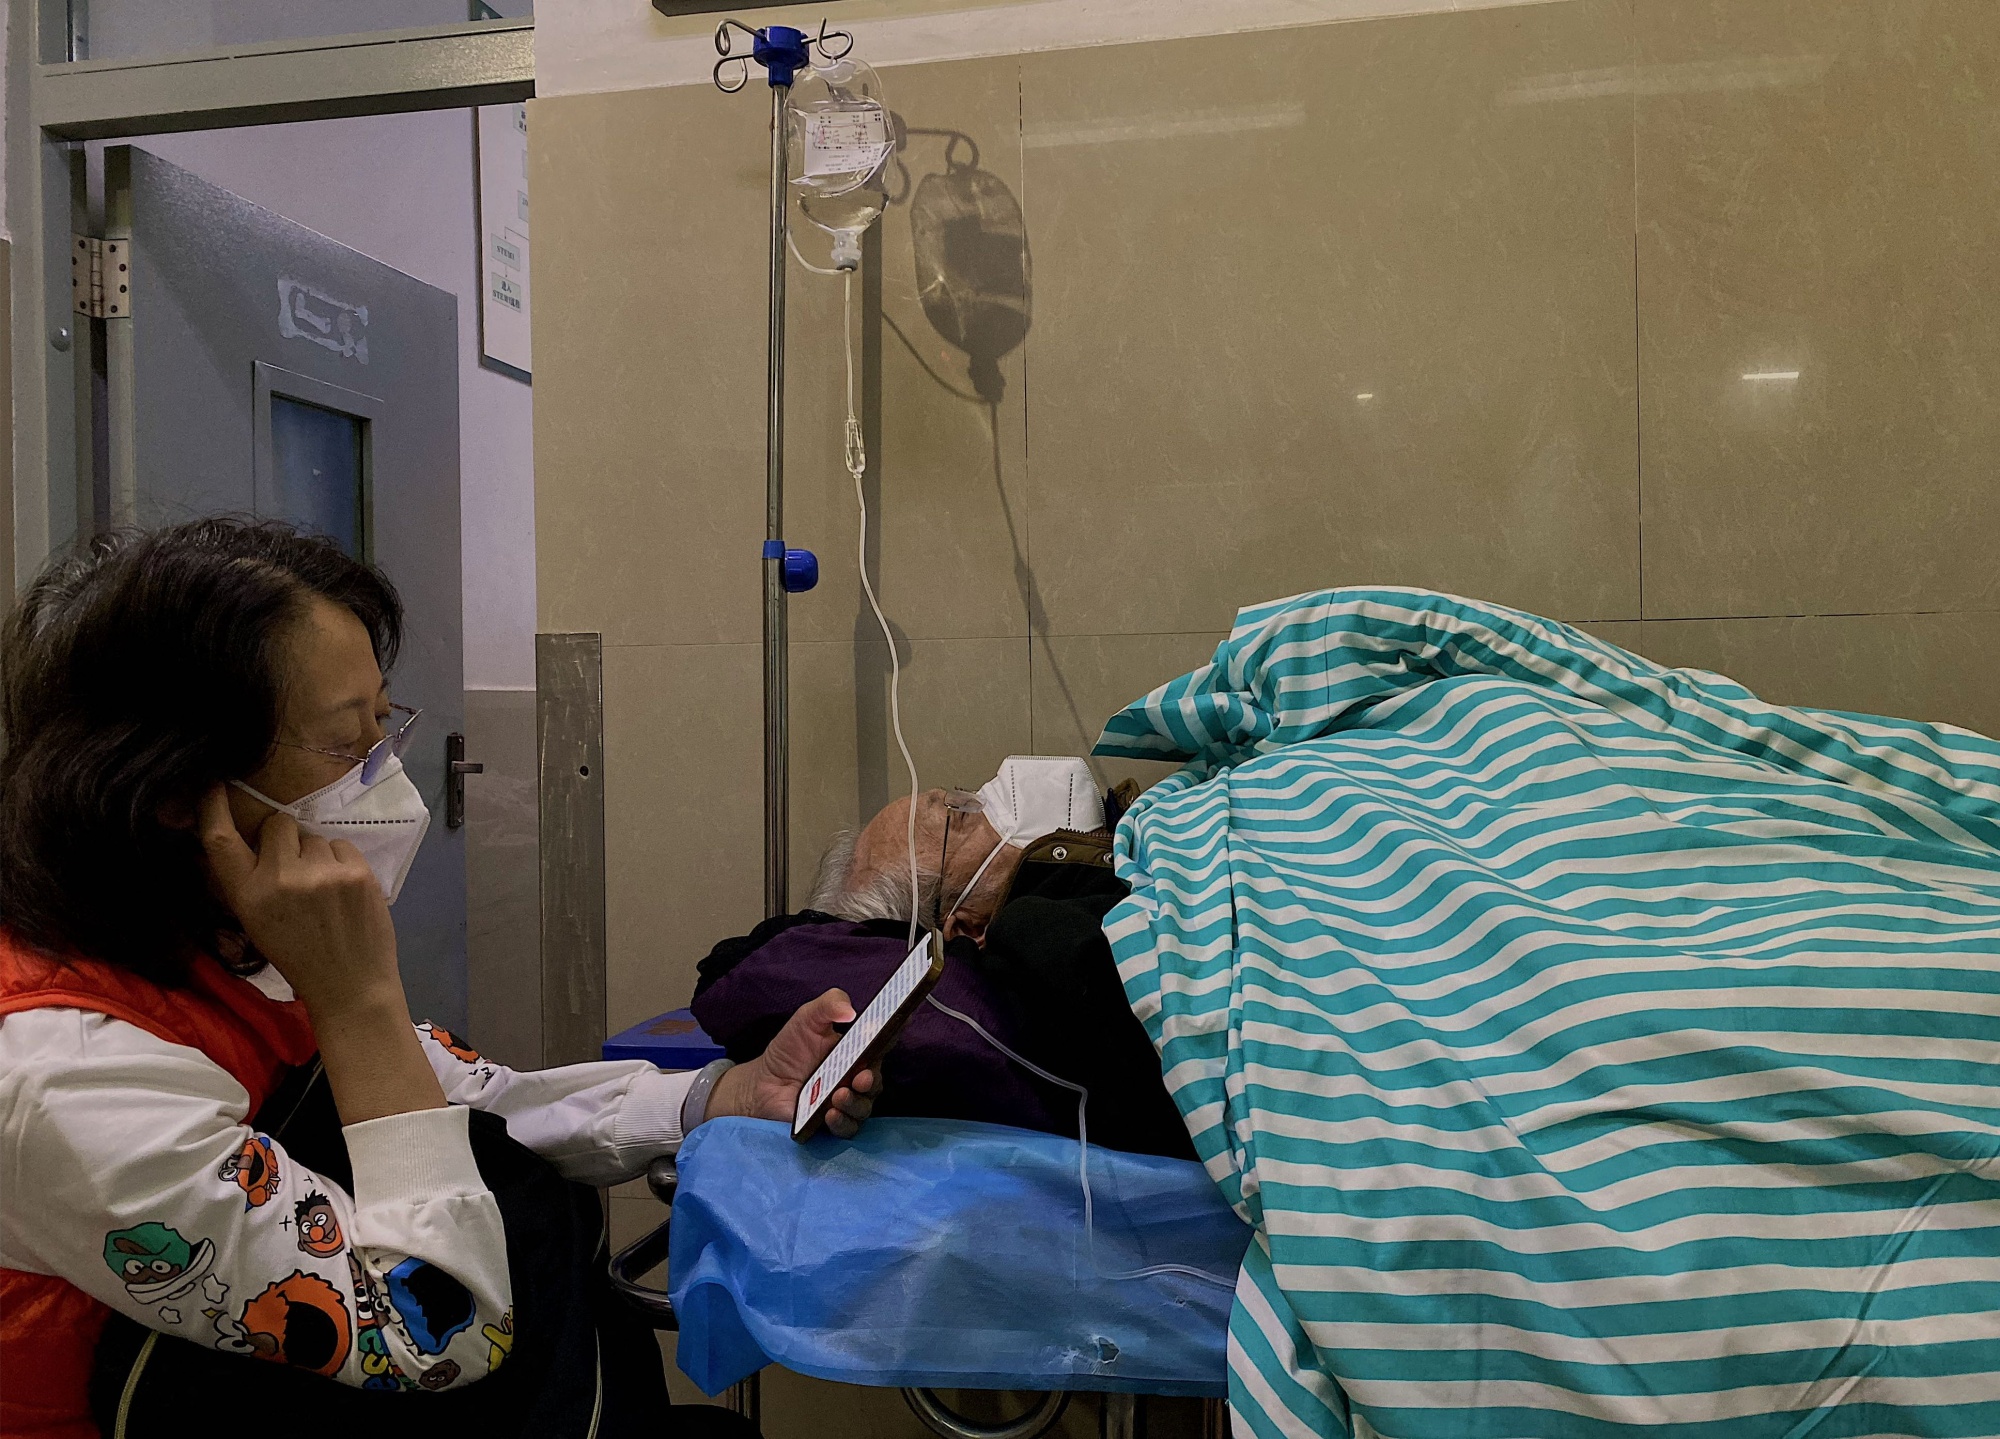 A Covid-19 patient at a hospital in Yunnan province on Jan. 9.